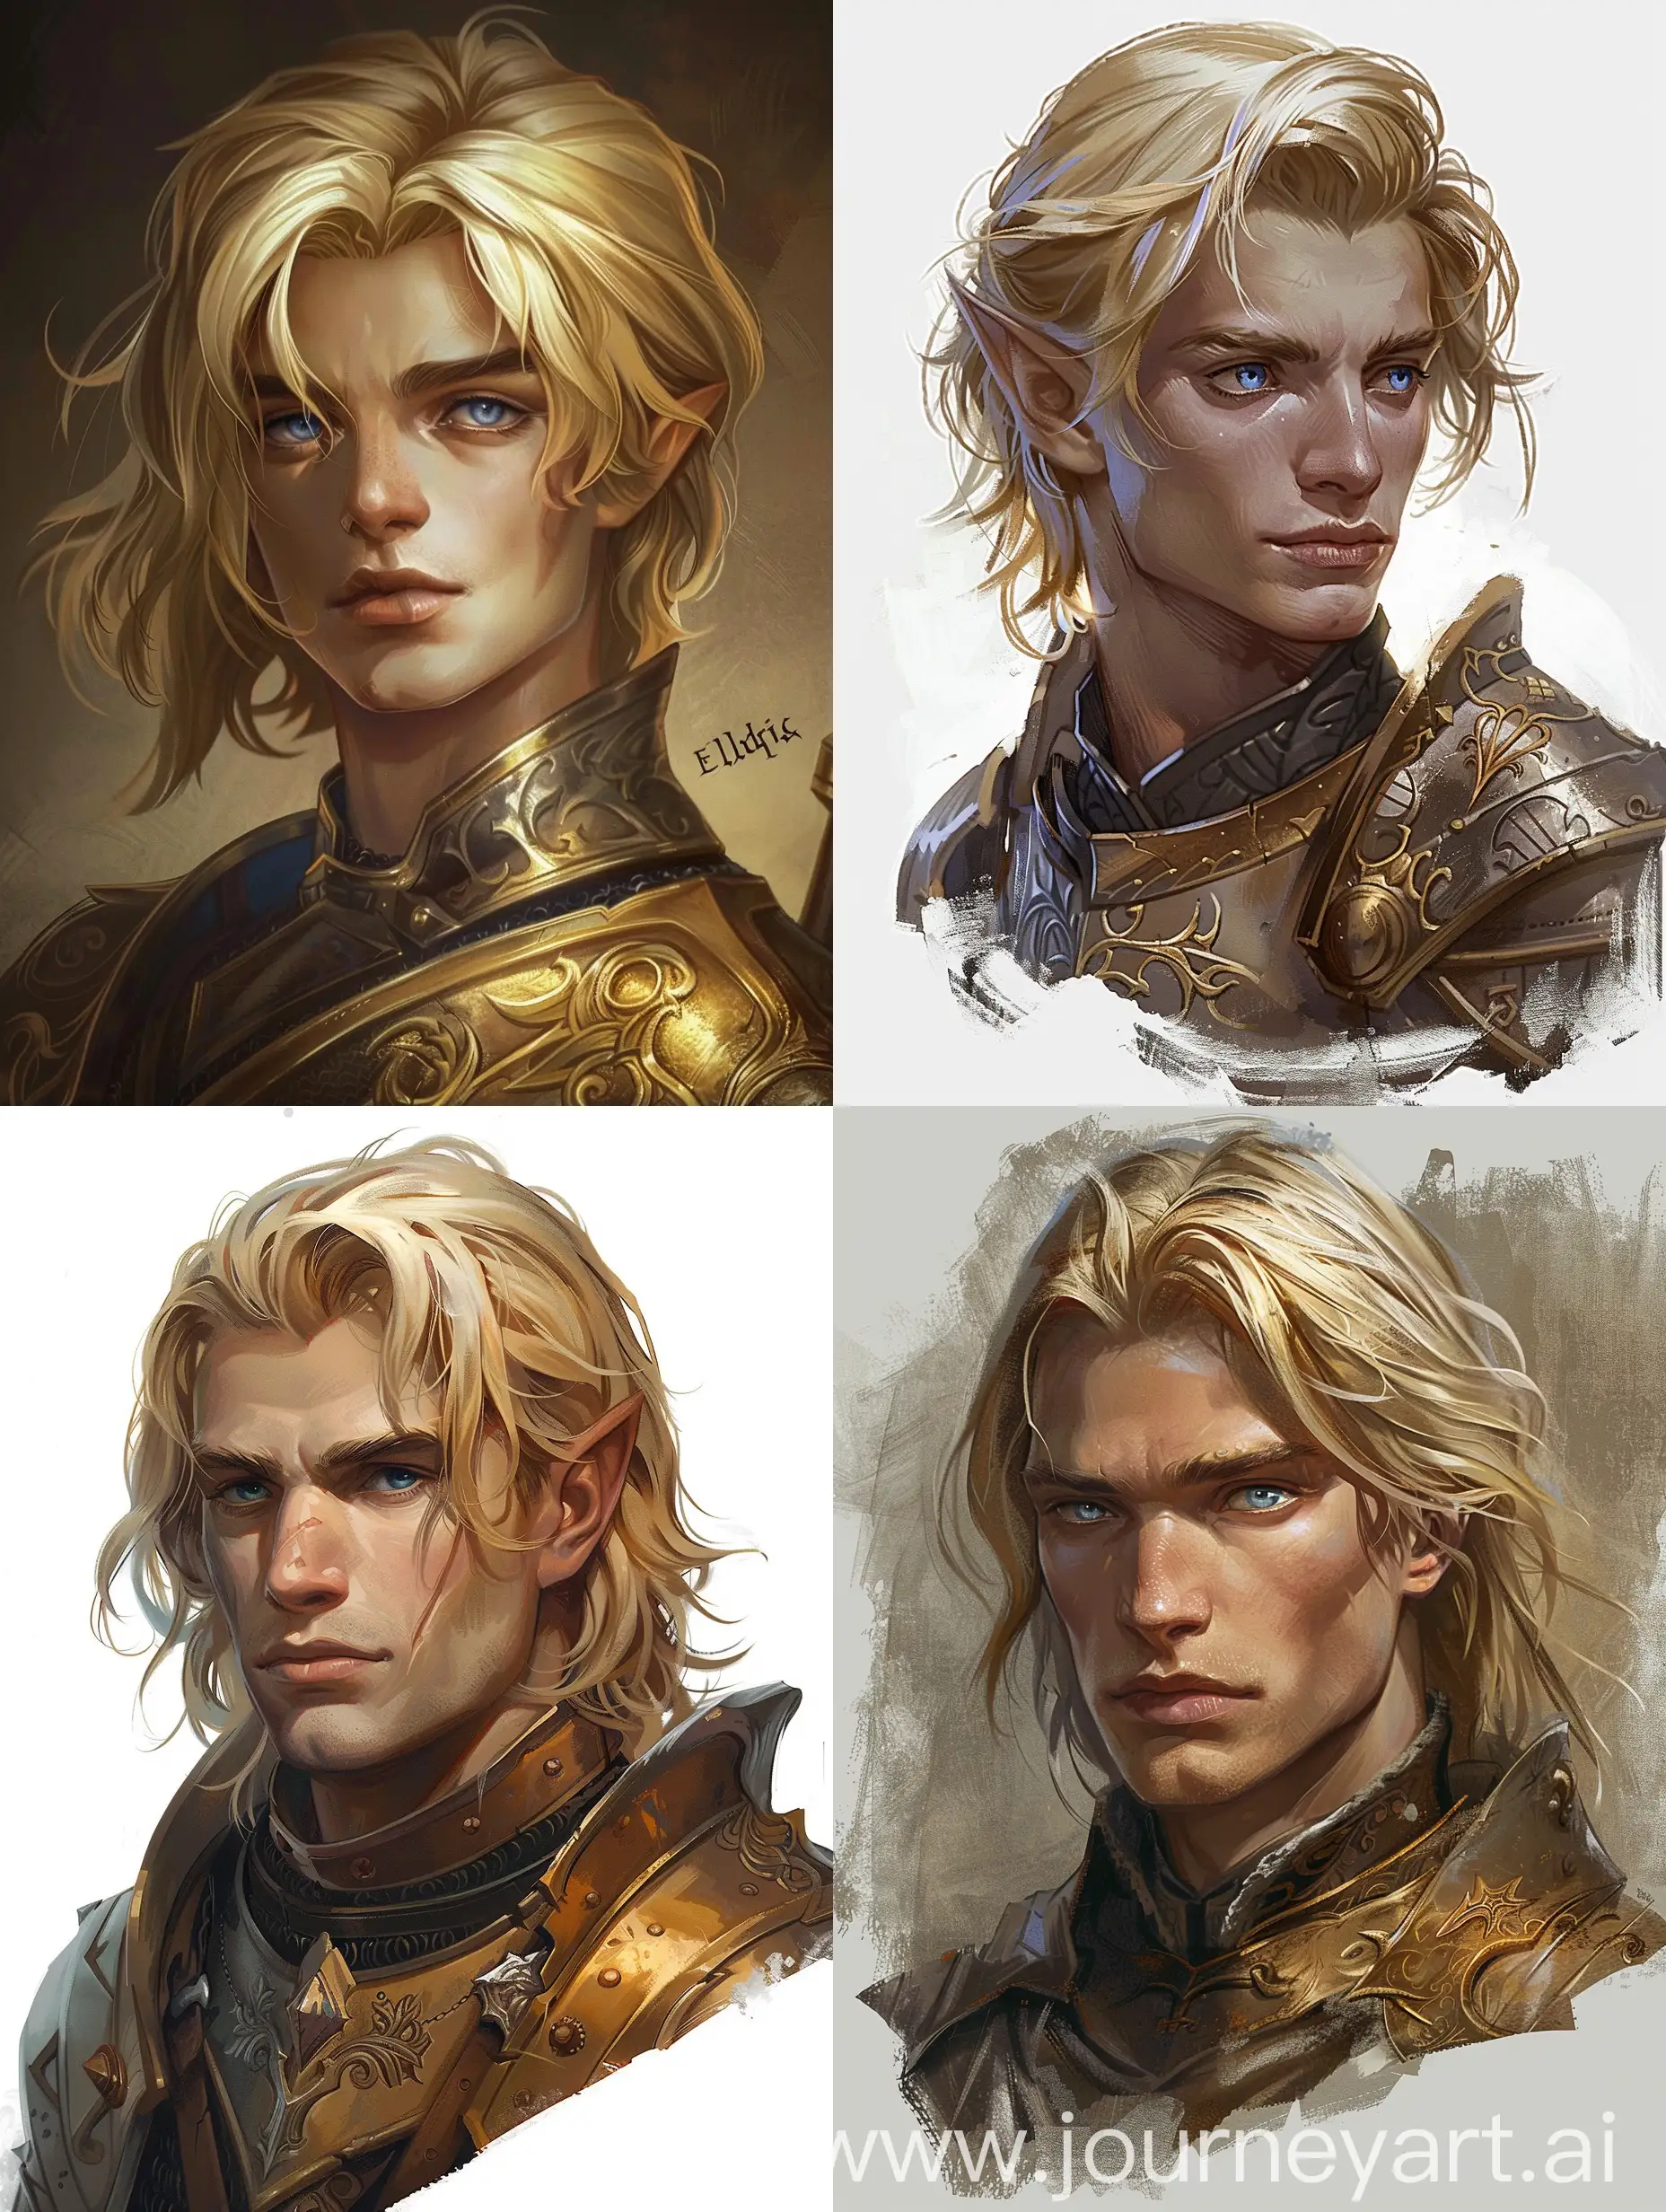 Describe Eldric, a noble-hearted knight in a fantasy world. He has blond hair, a sturdy physique, and exudes bravery. A knight who upholds truth and justice. Provide details on his hair length and style, the intensity of his blue eyes reflecting determination, and his tall and robust stature. Ensure these elements create an image of a valiant knight with a strong sense of righteousness and courage."